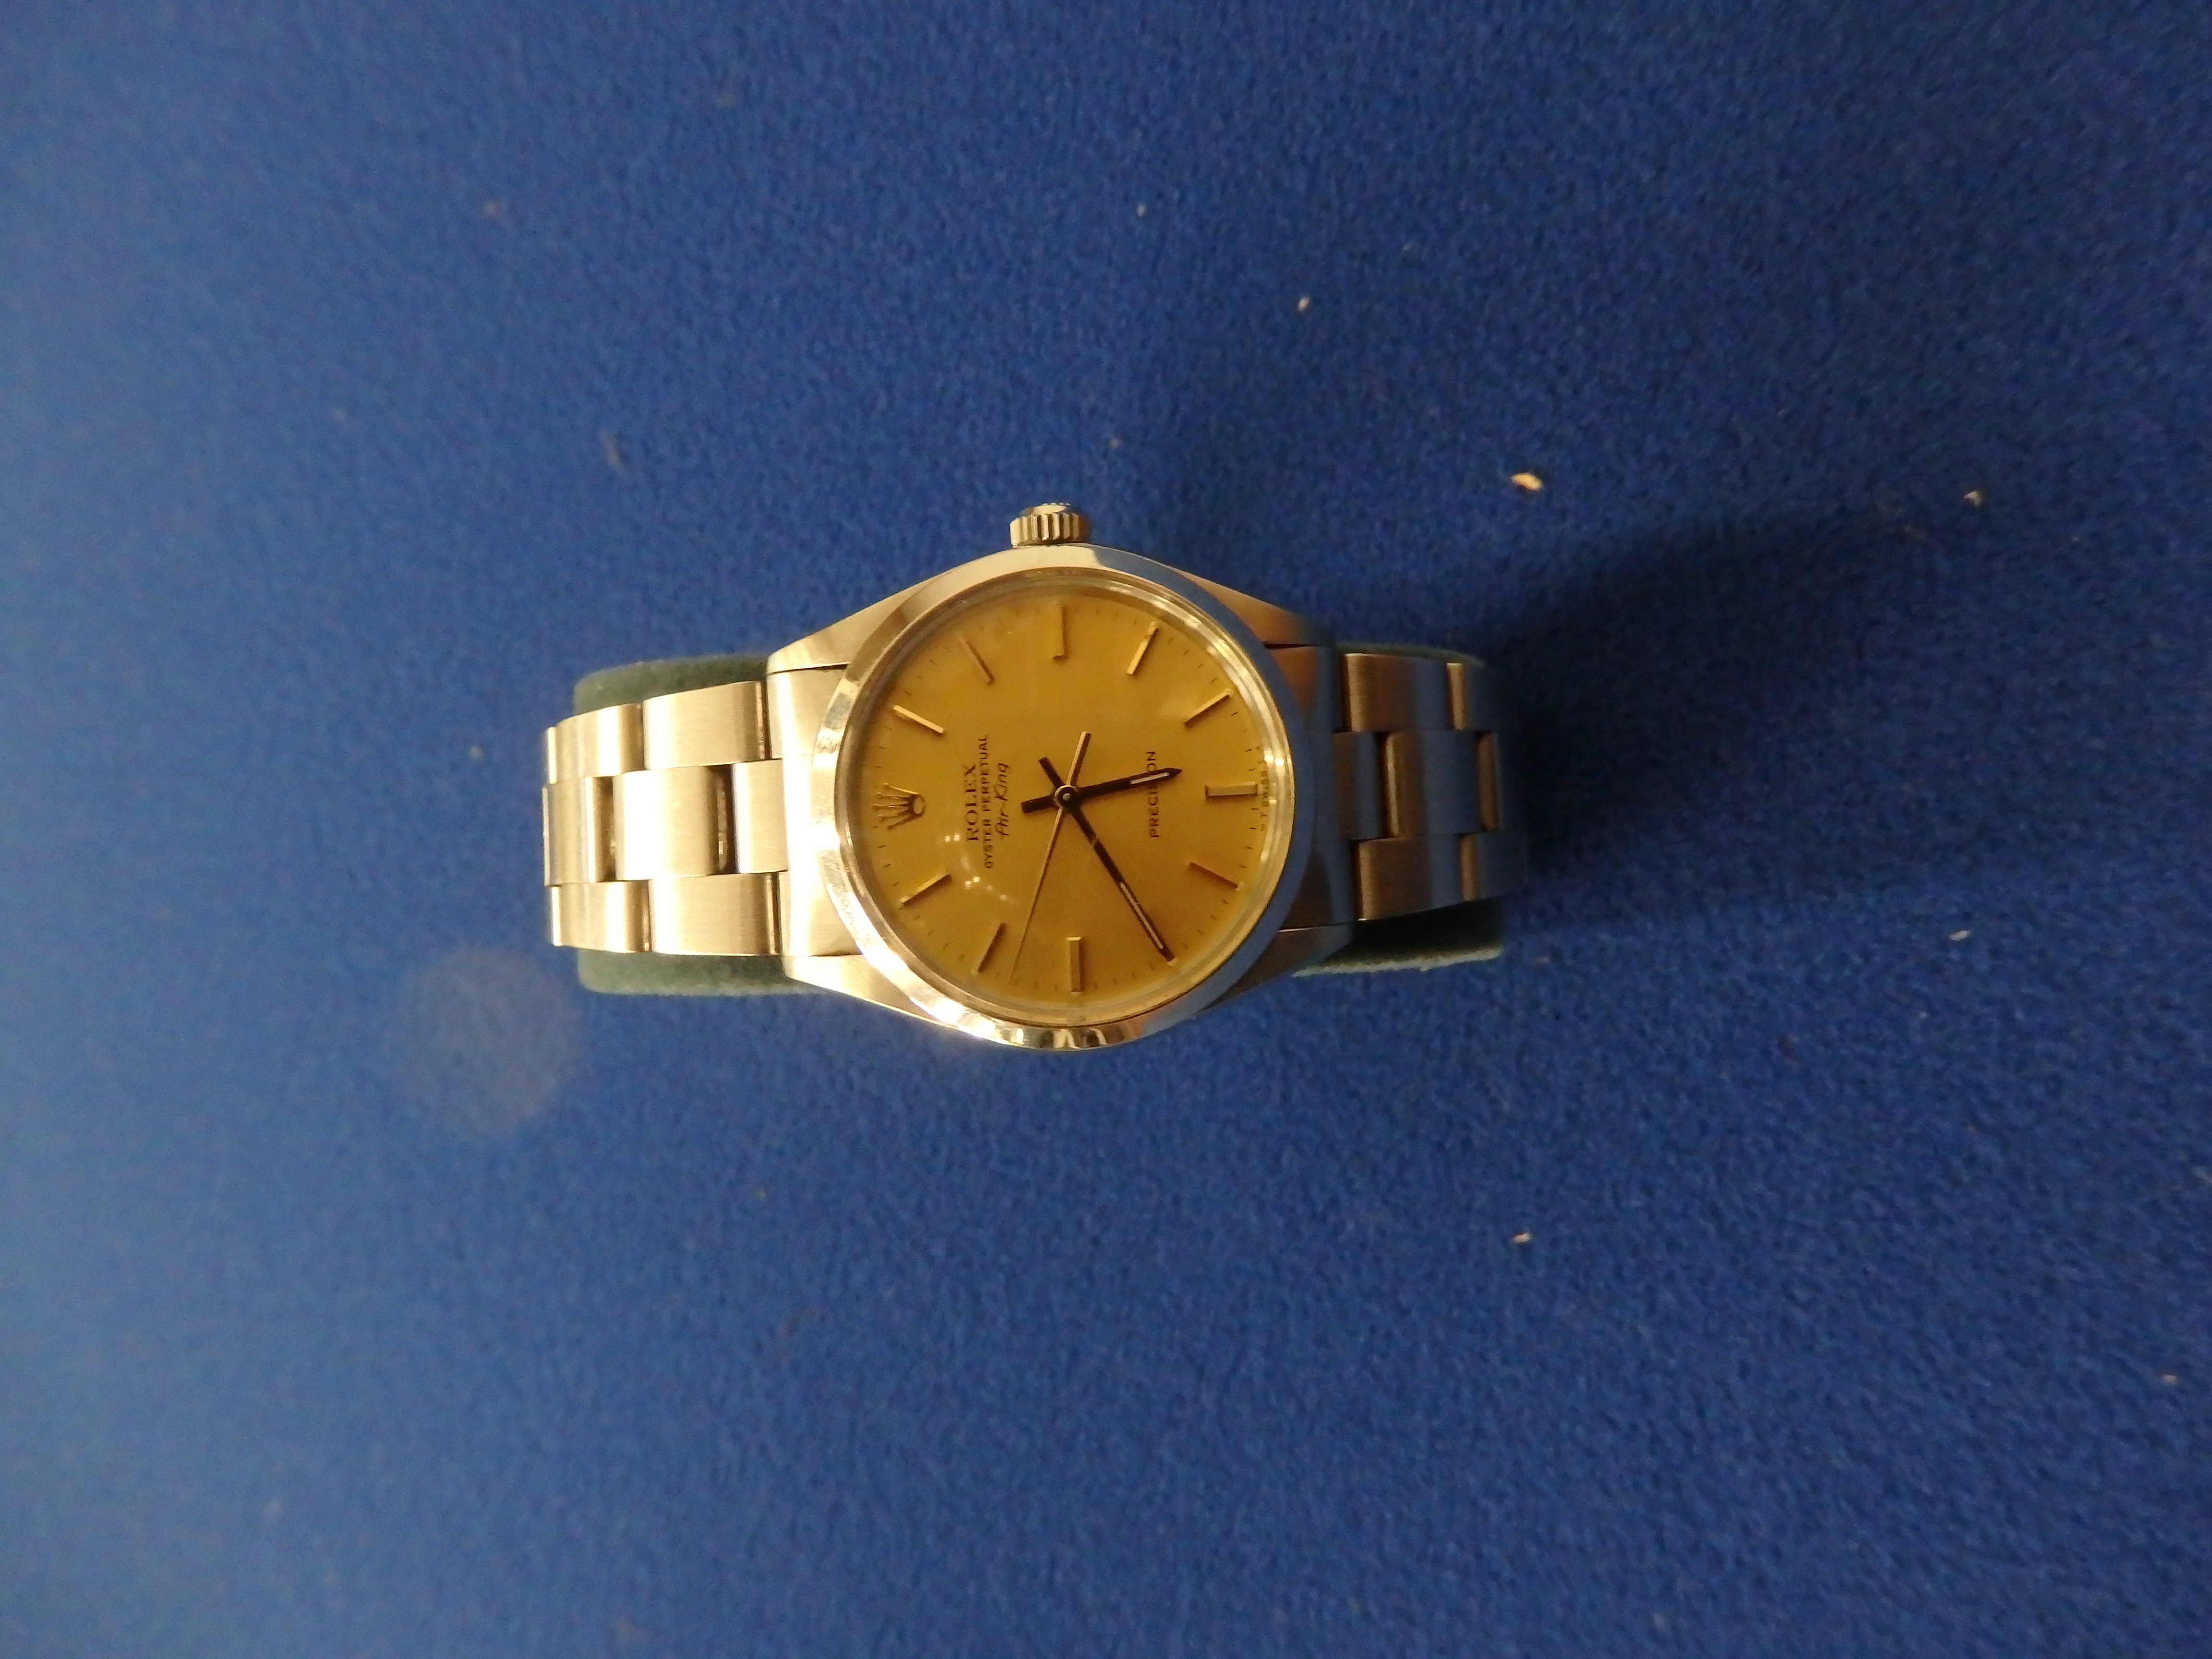 Gents Rolex Oyster Air King watch date purchased sept 1981 - Image 4 of 8